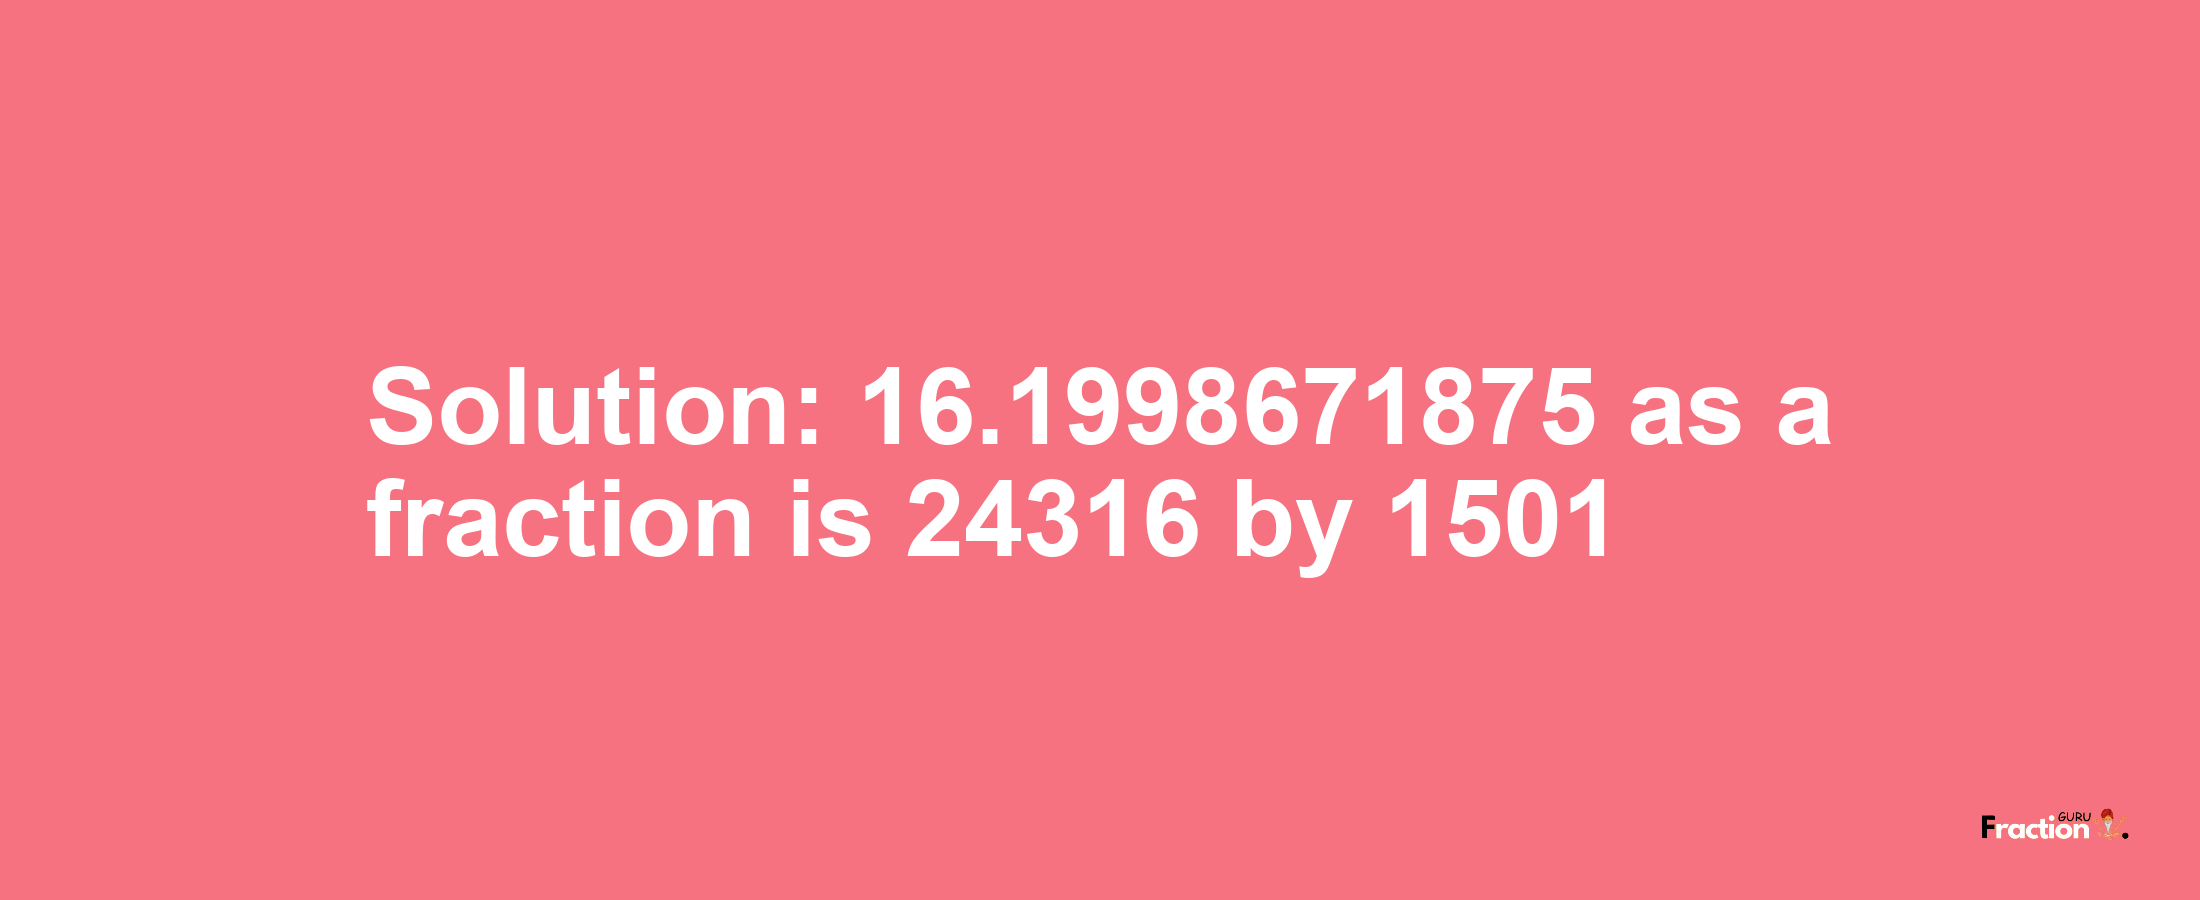 Solution:16.1998671875 as a fraction is 24316/1501